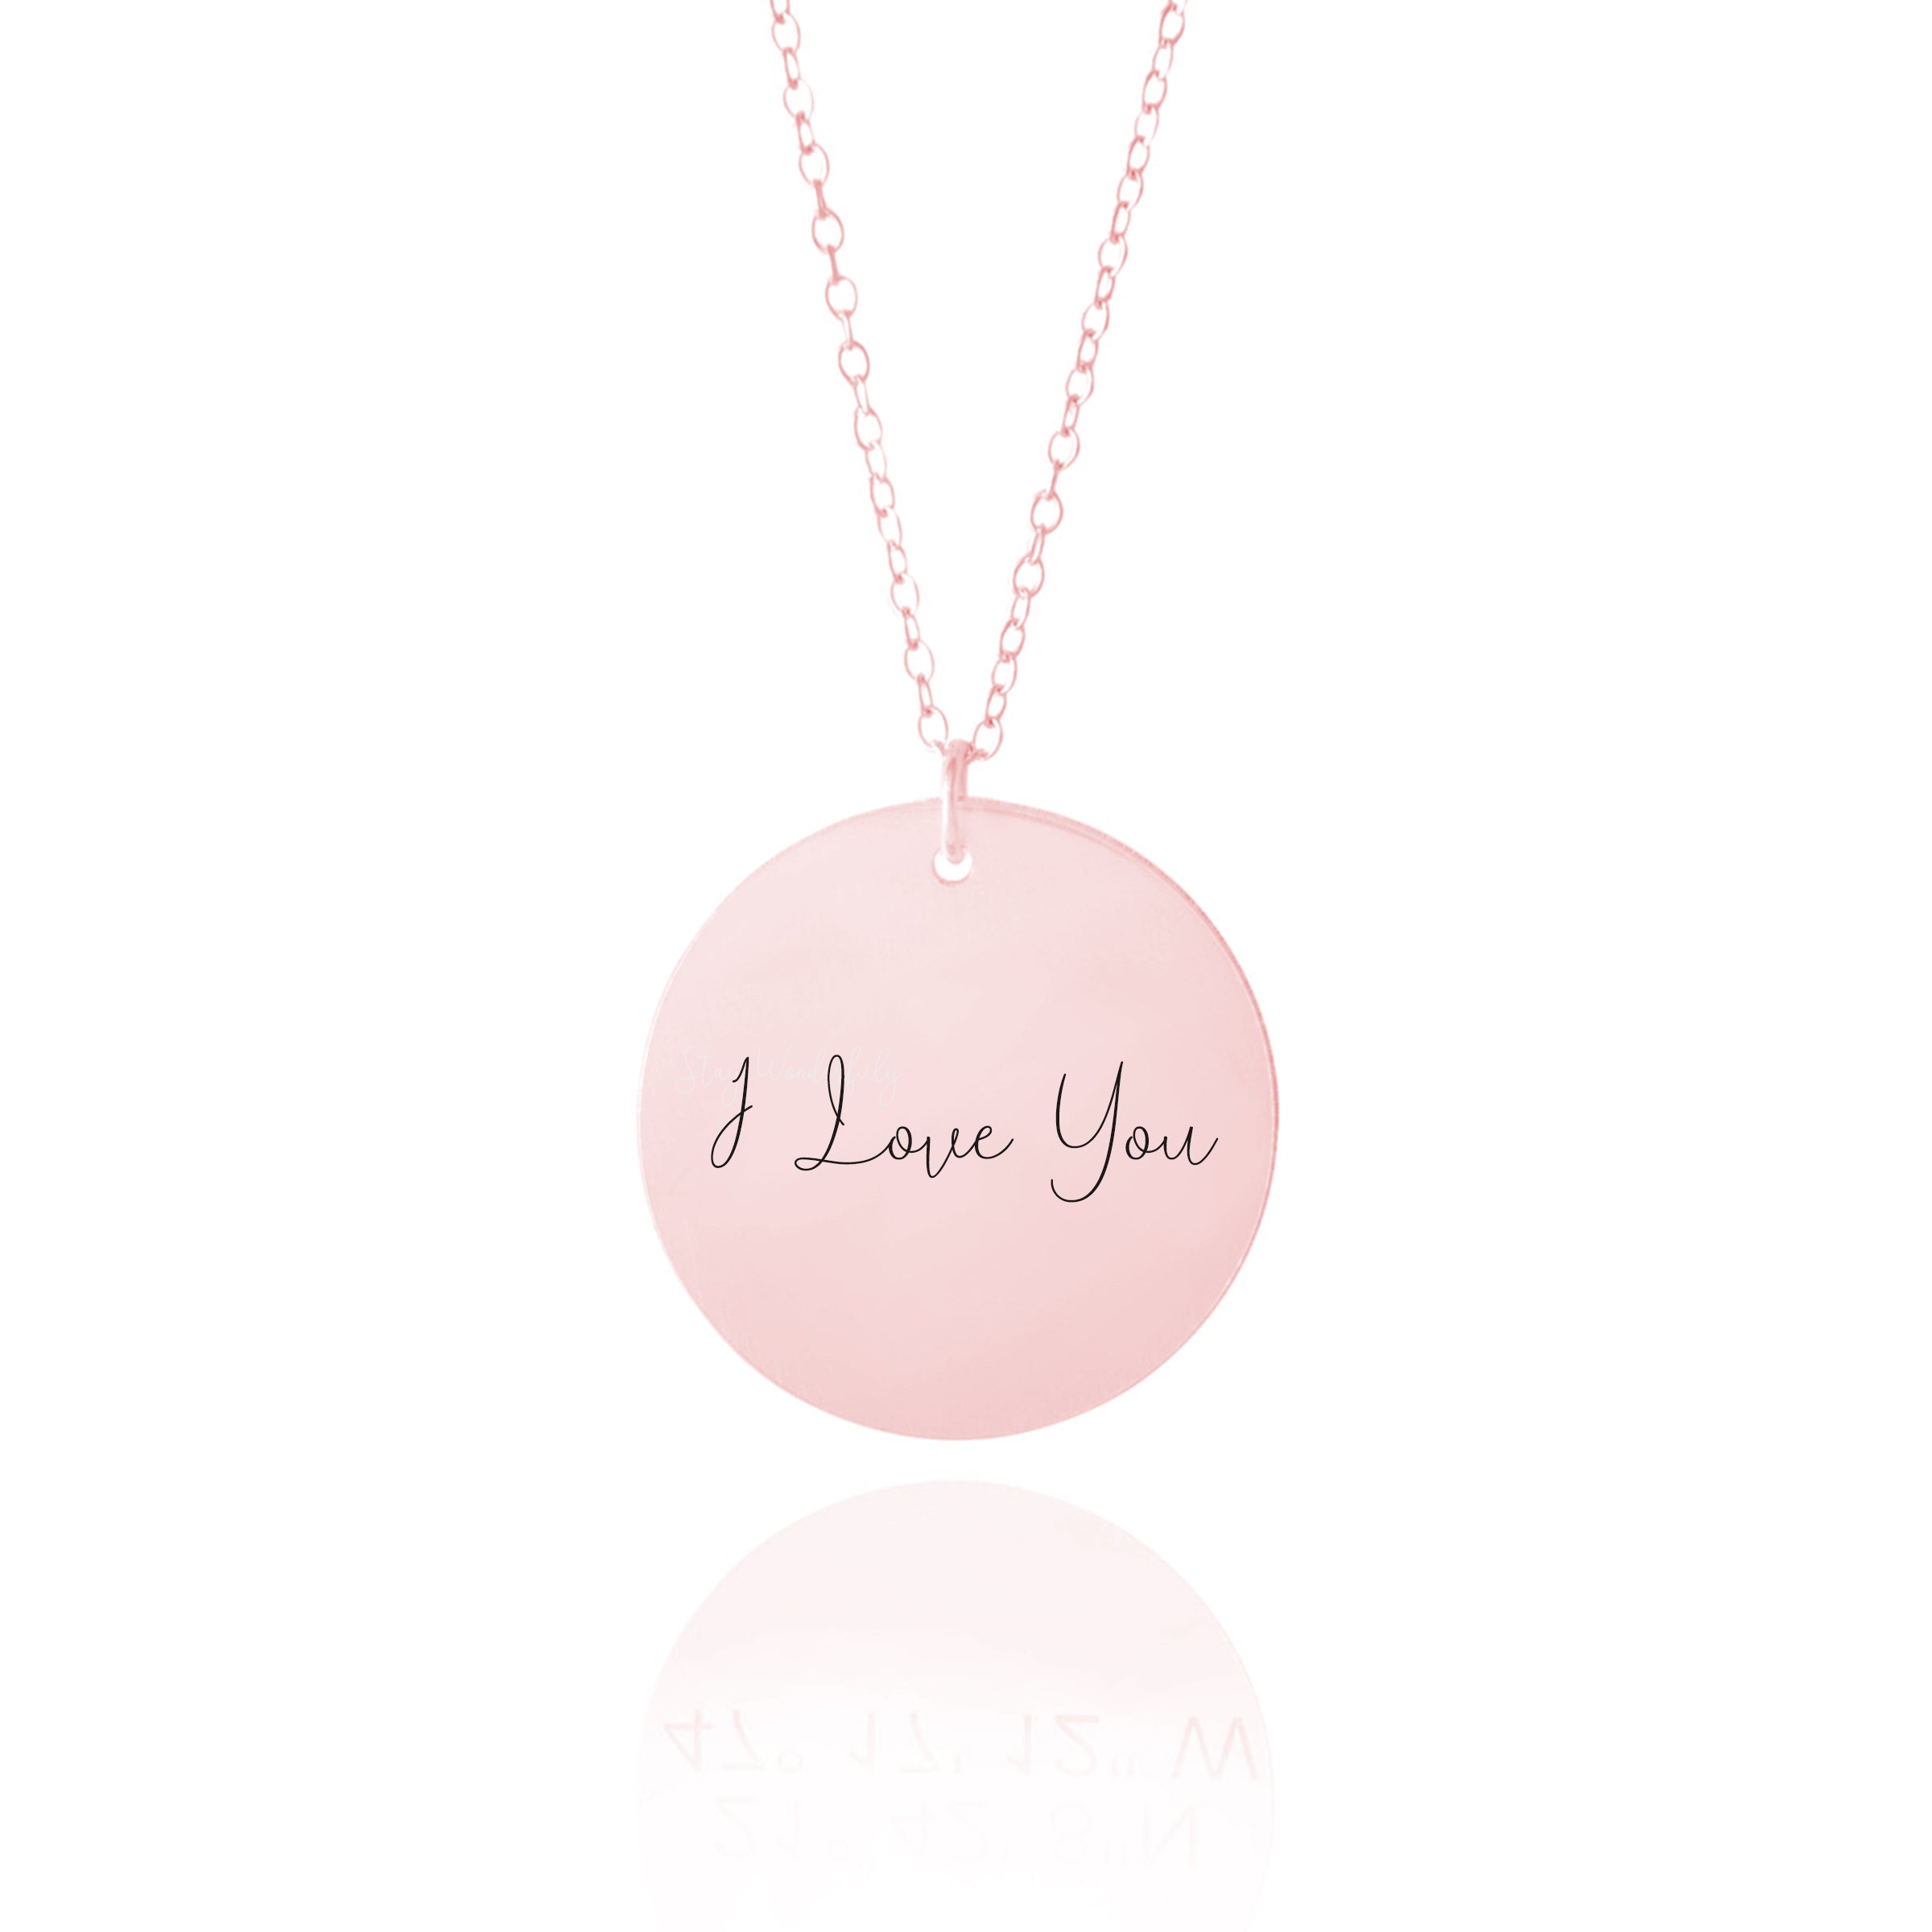 Actual handwriting engraved on Locket, in silver/rose/gold pendant – My-Whys